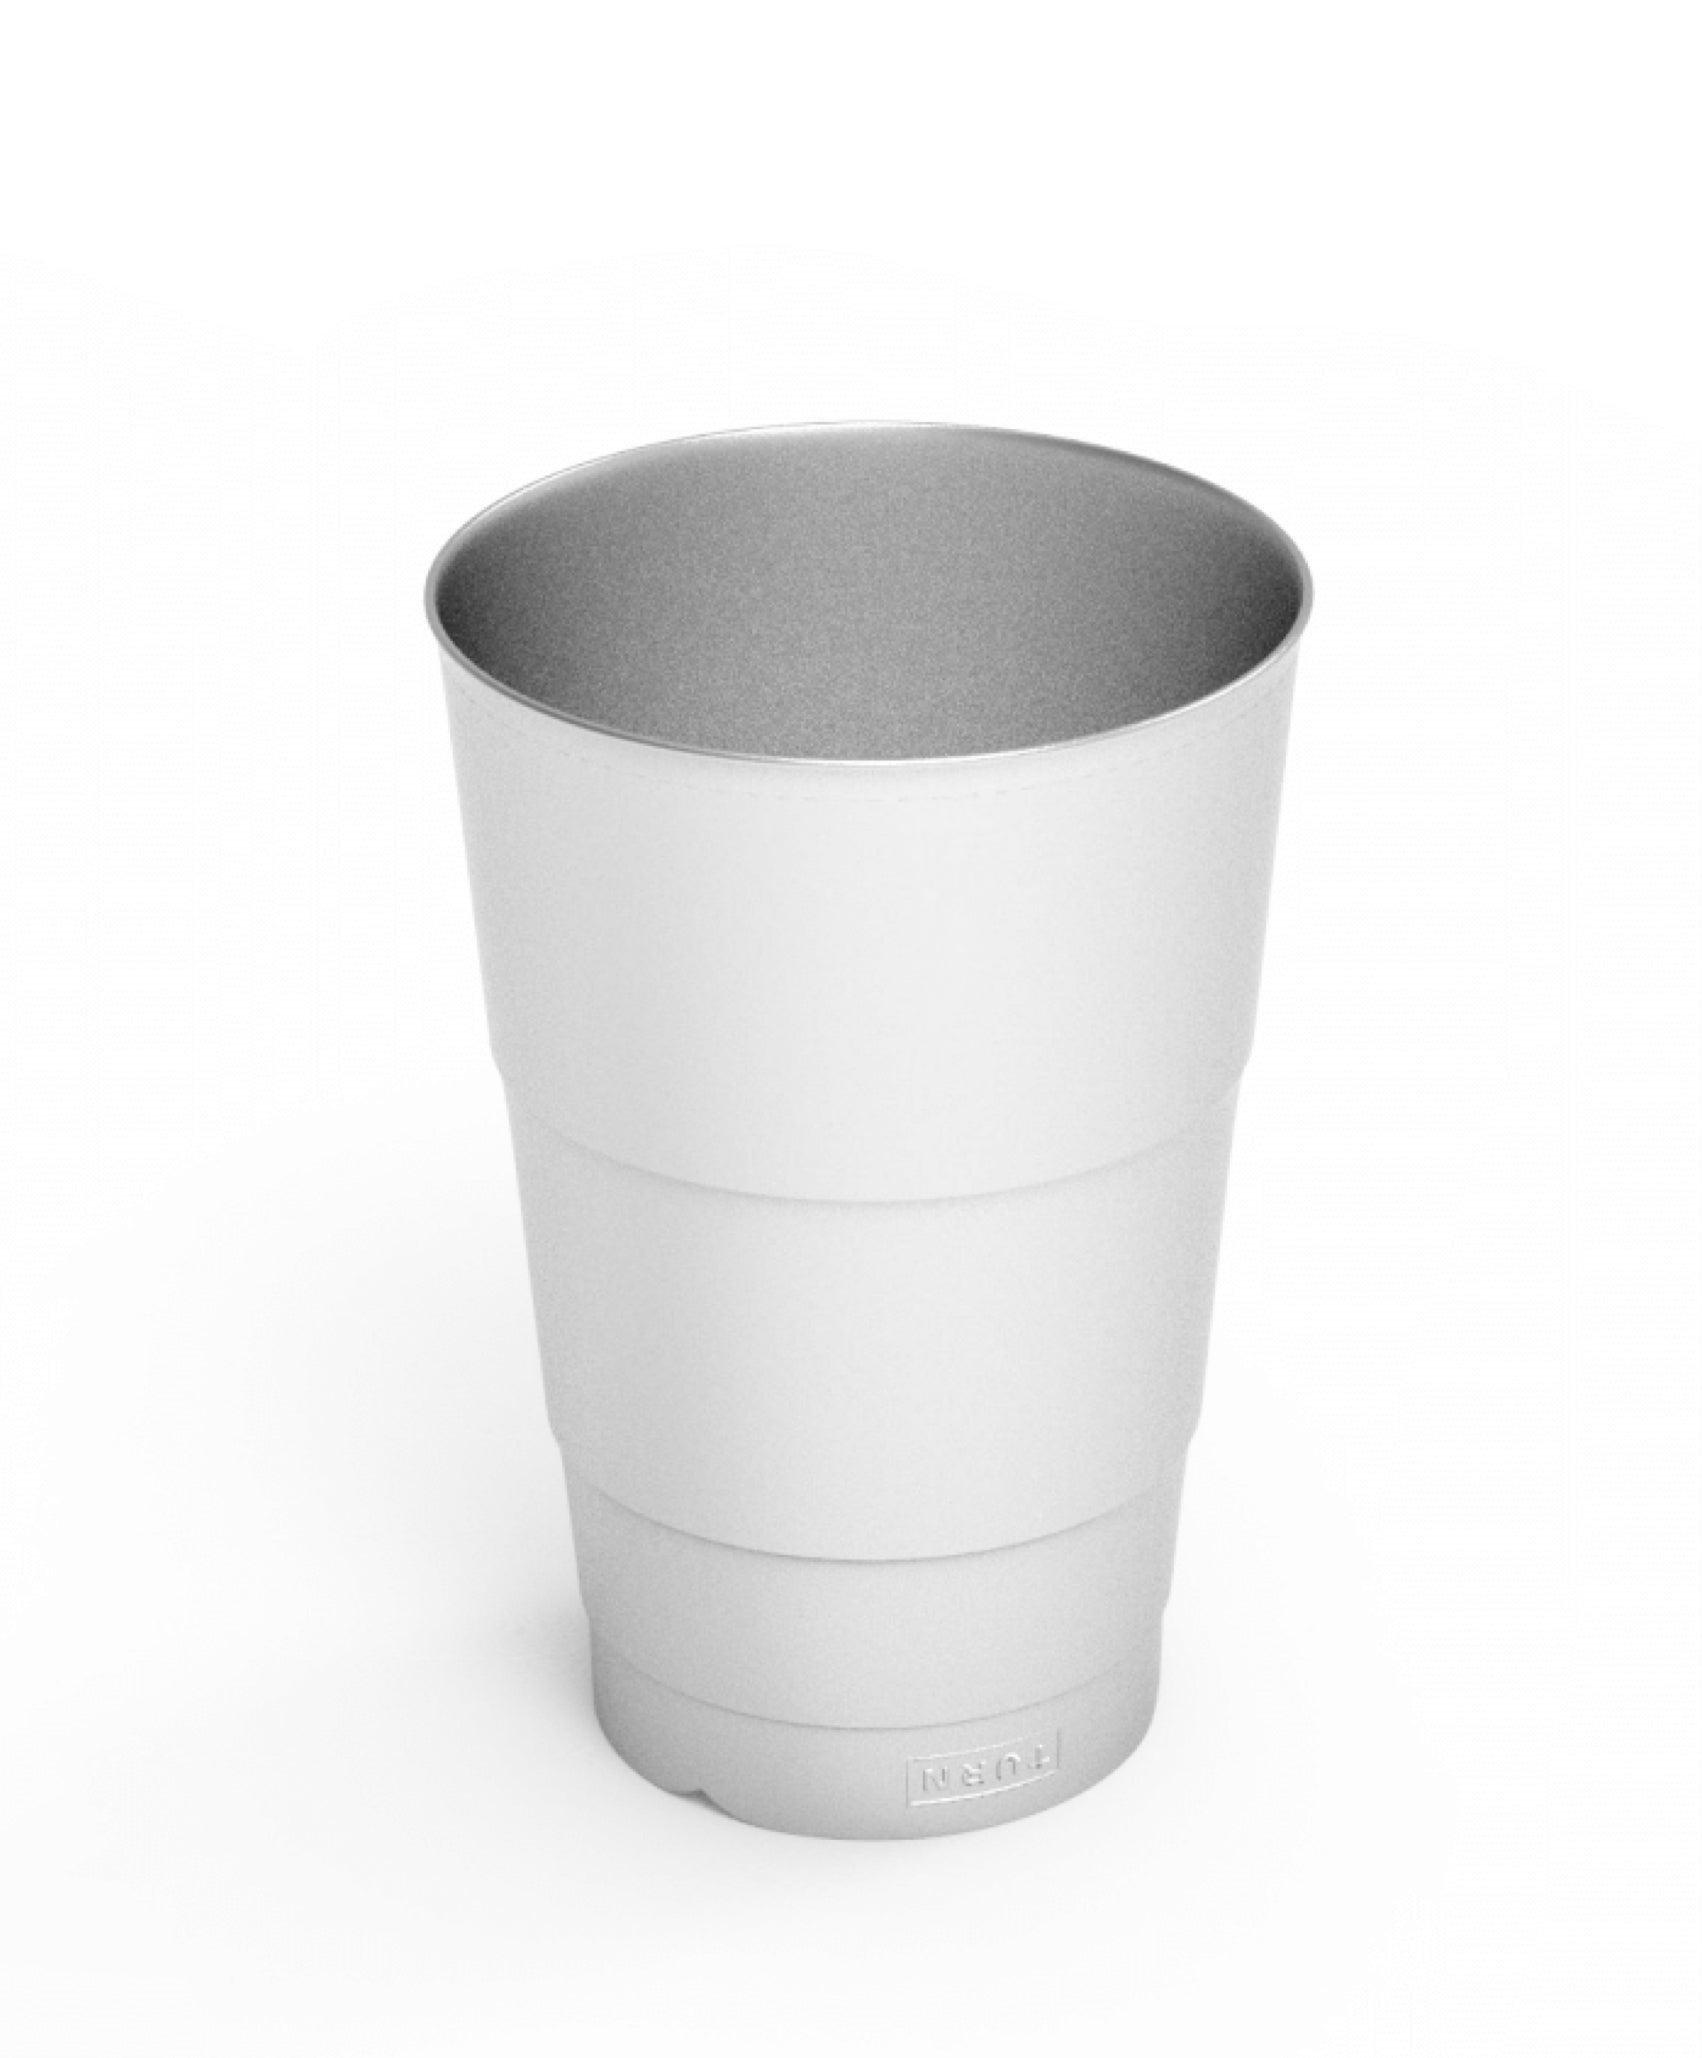 TURN Systems  To be reusable, cups must be reTURNable – Turn Systems